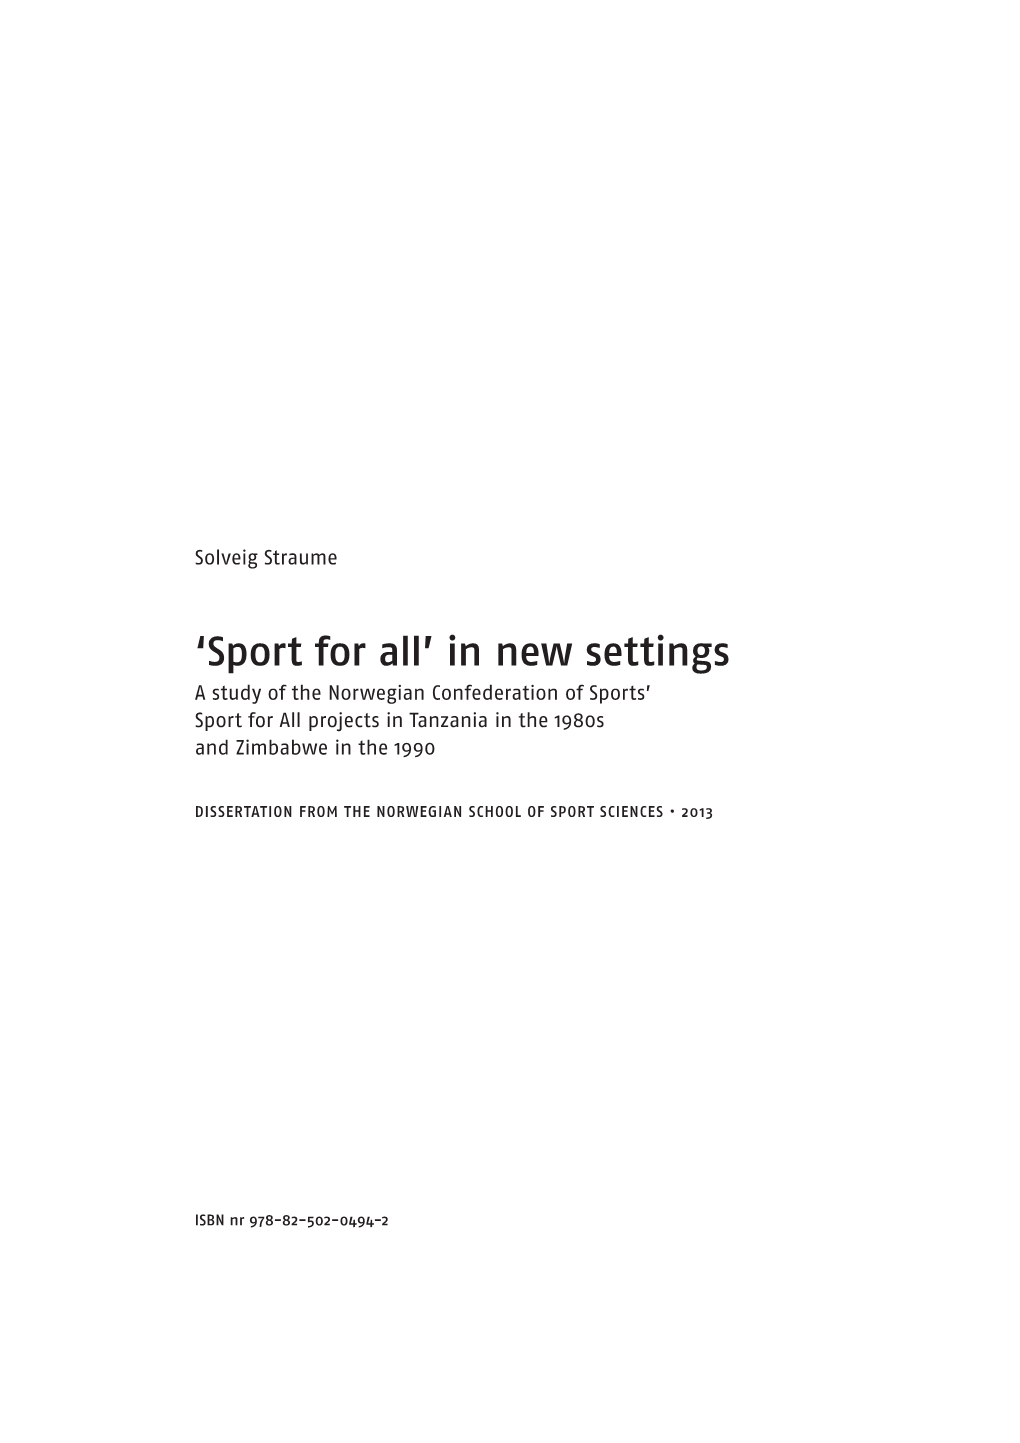 'Sport for All' in New Settings